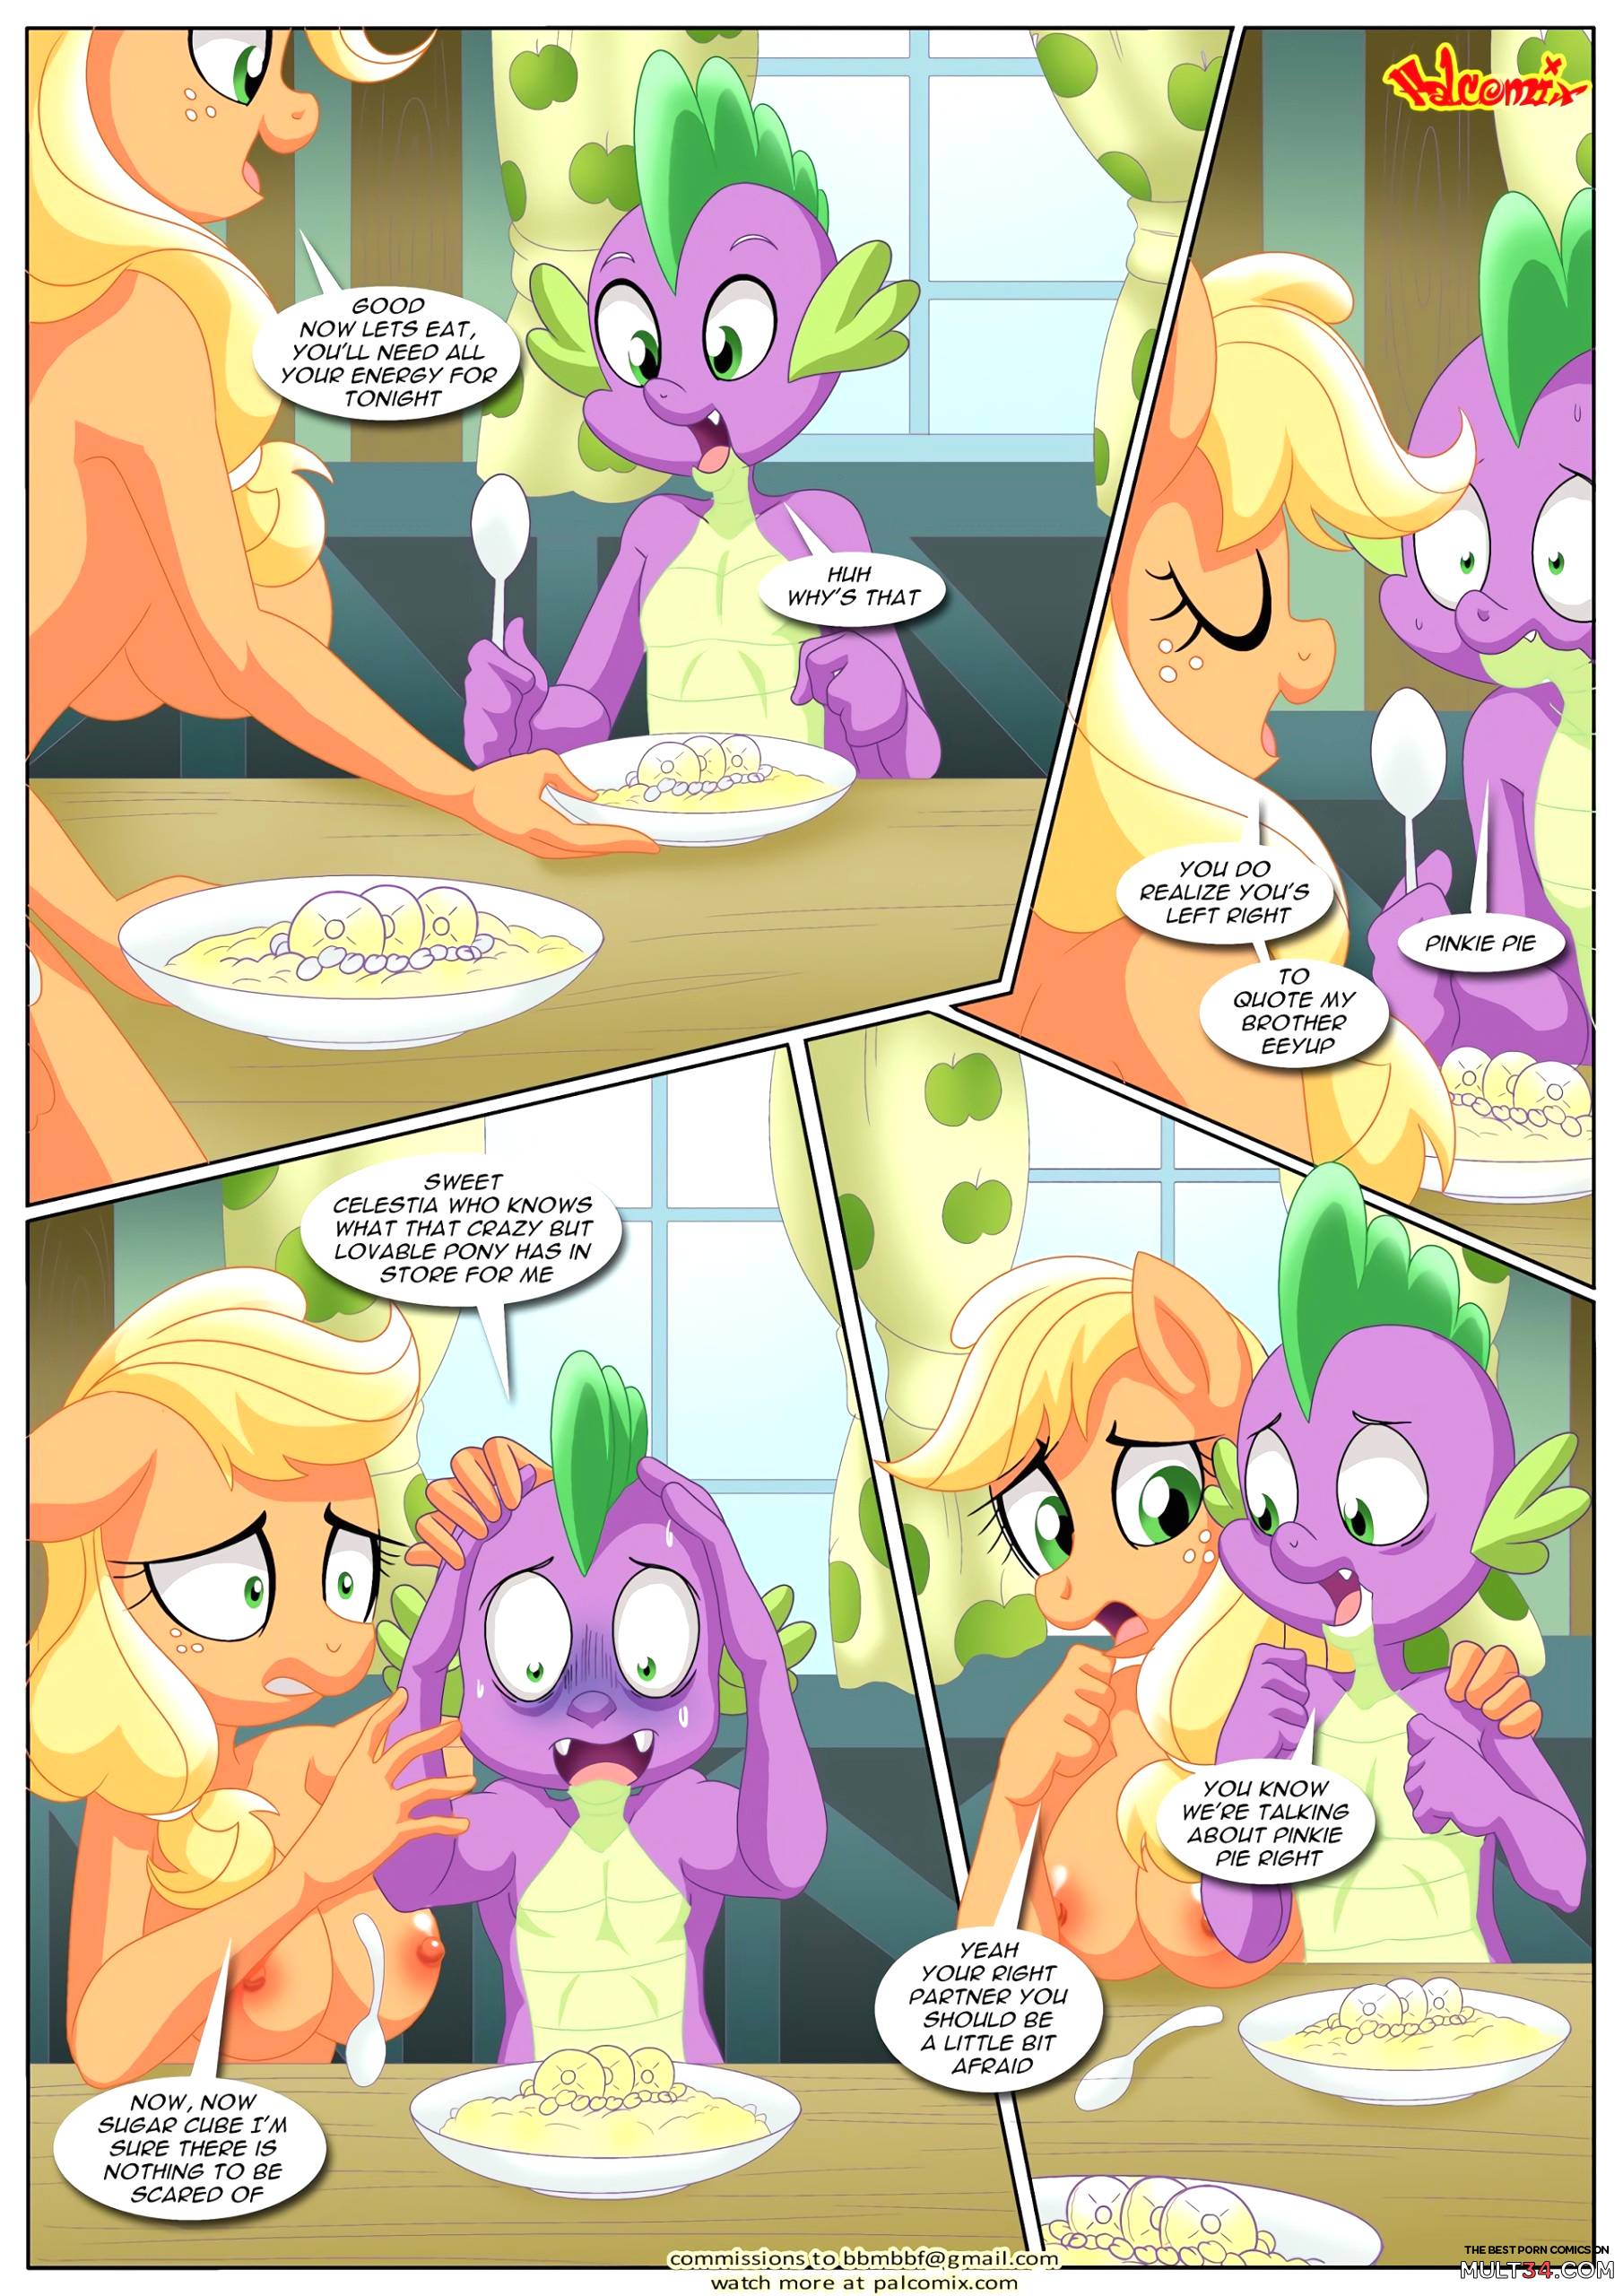 Power of Dragon Mating - Chapter 2 page 7